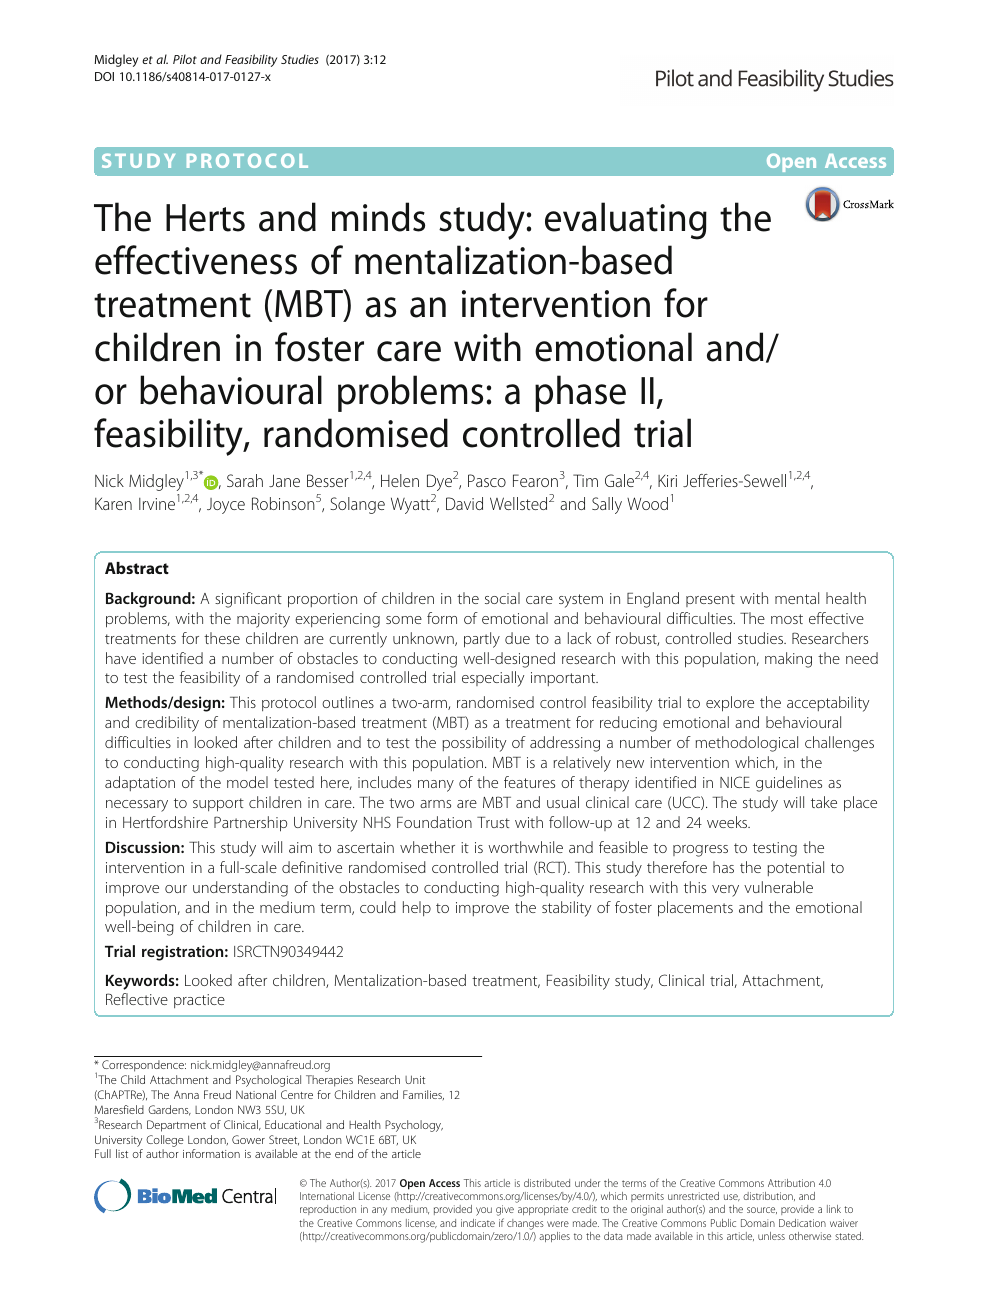 Gendanne Lil strategi The Herts and minds study: evaluating the effectiveness of  mentalization-based treatment (MBT) as an intervention for children in  foster care with emotional and/or behavioural problems: a phase II,  feasibility, randomised controlled trial –